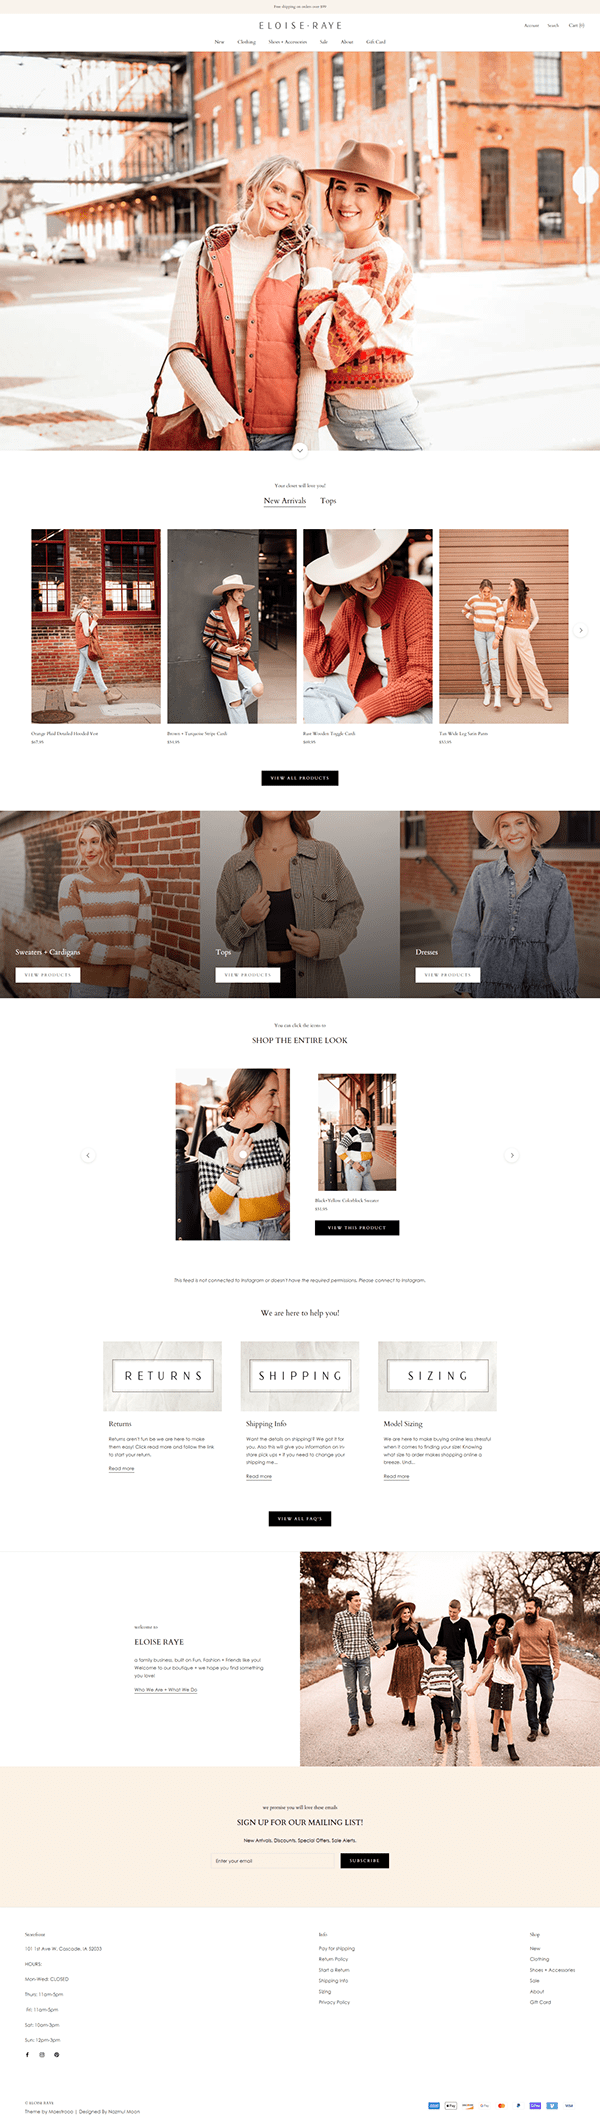 Clothing Brand Shopify Store Design | Shopify Expert